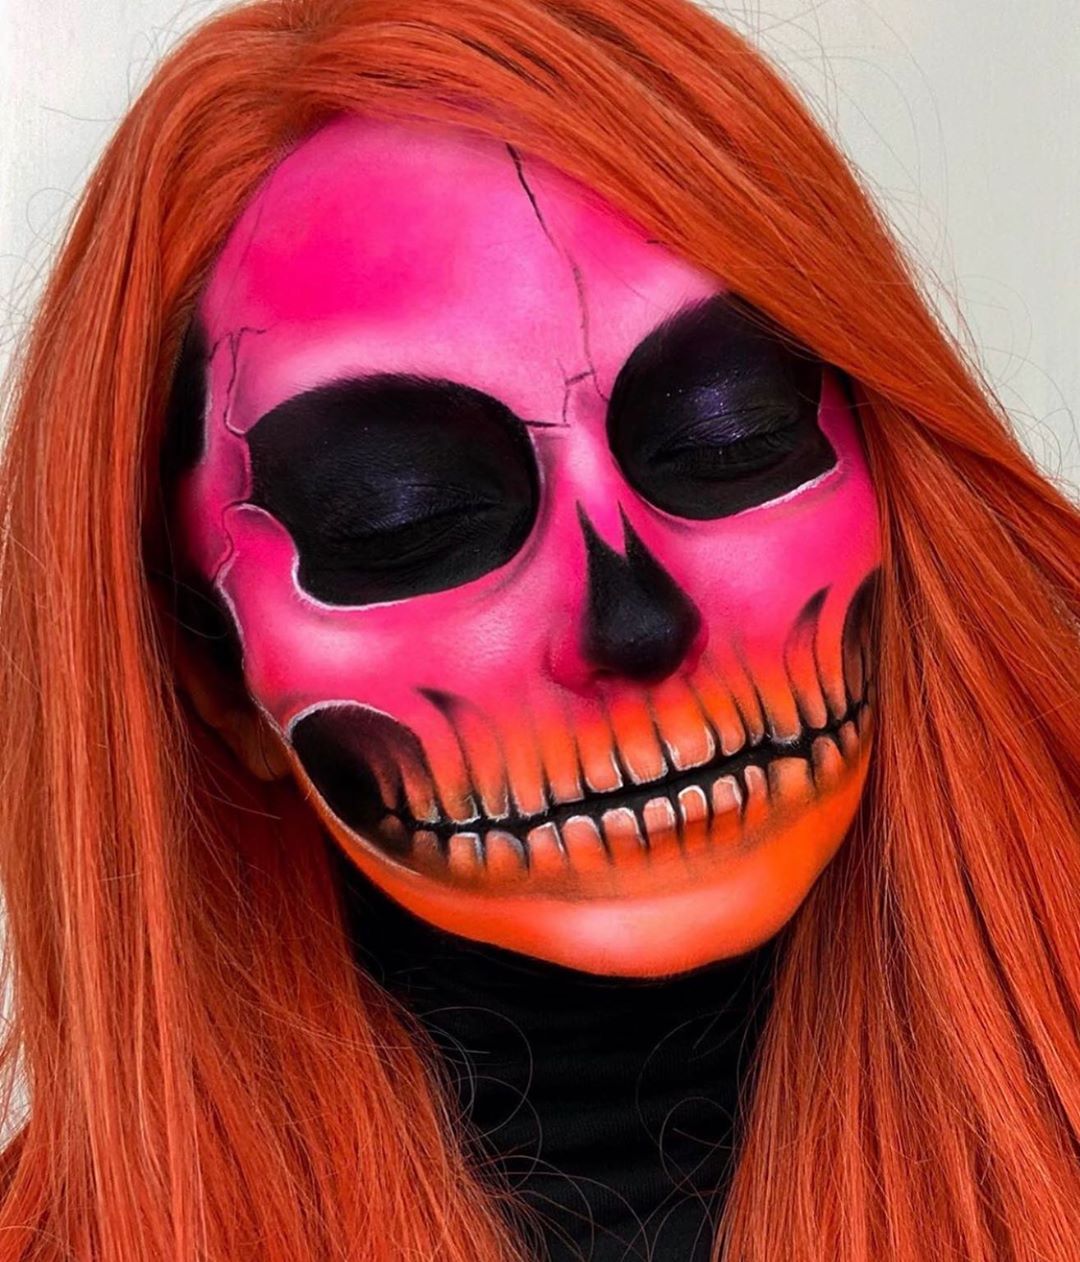 J. Cat Beauty - @cakedbykelsey is the prettiest sugar skull we’ve ever seen🥺💖 She used our Pris-Metal Chrome Eye Mousse in the shade “Pinky Promise”💕
.
.
.
#jcat #jcatbeauty #trendmood #look #makeup #...